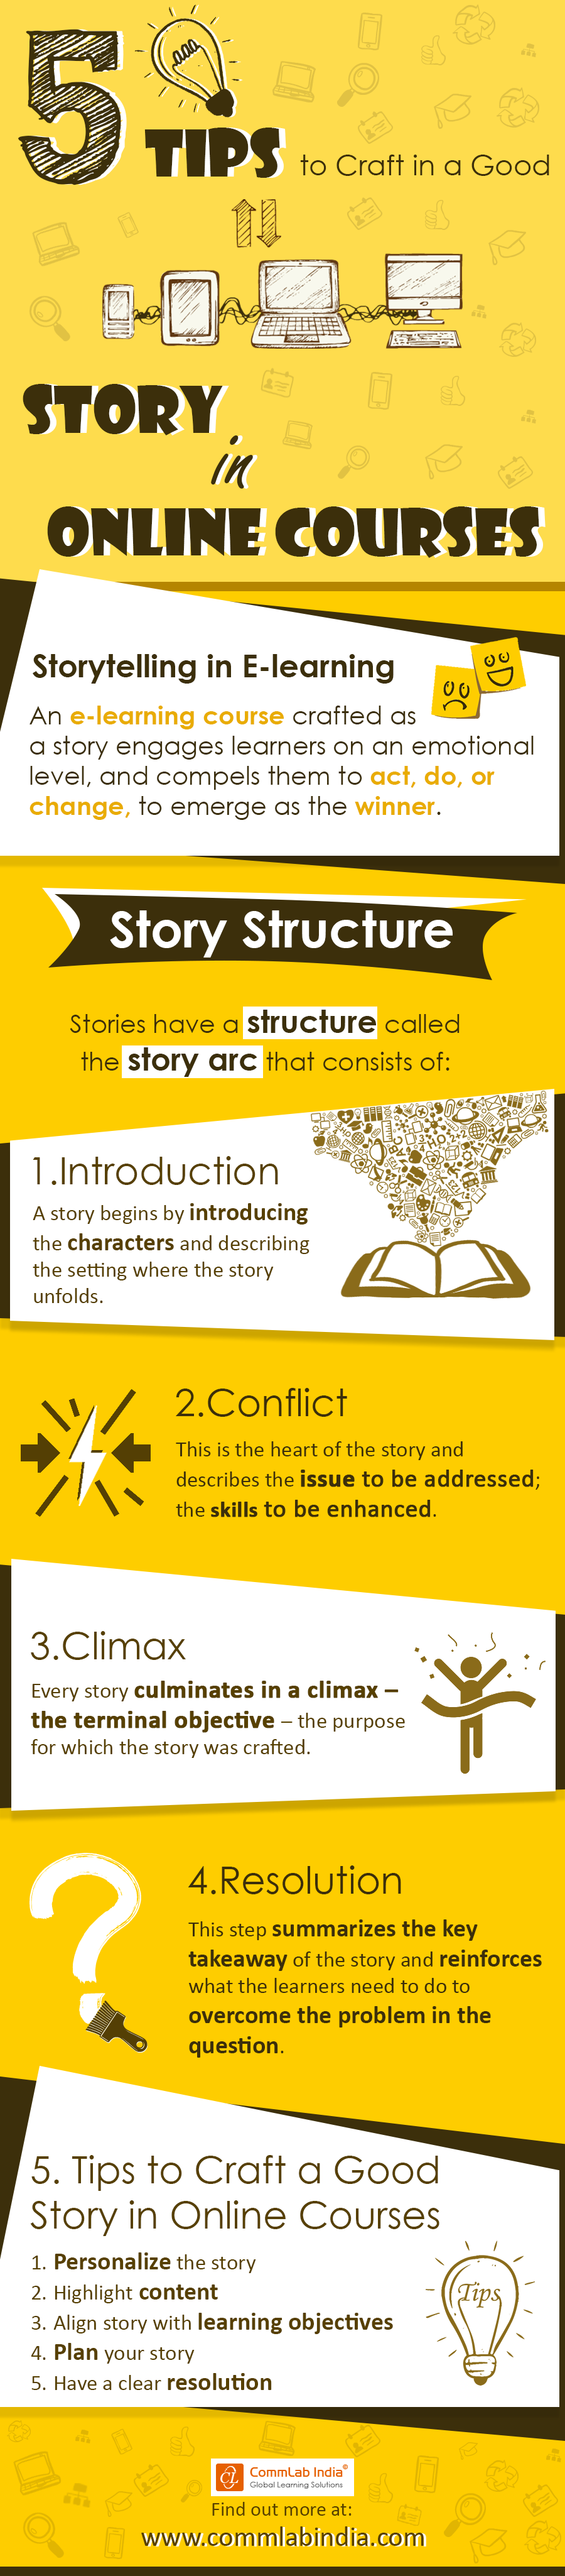 5 Tips to Craft a Good Story in Online Courses [Infographic]